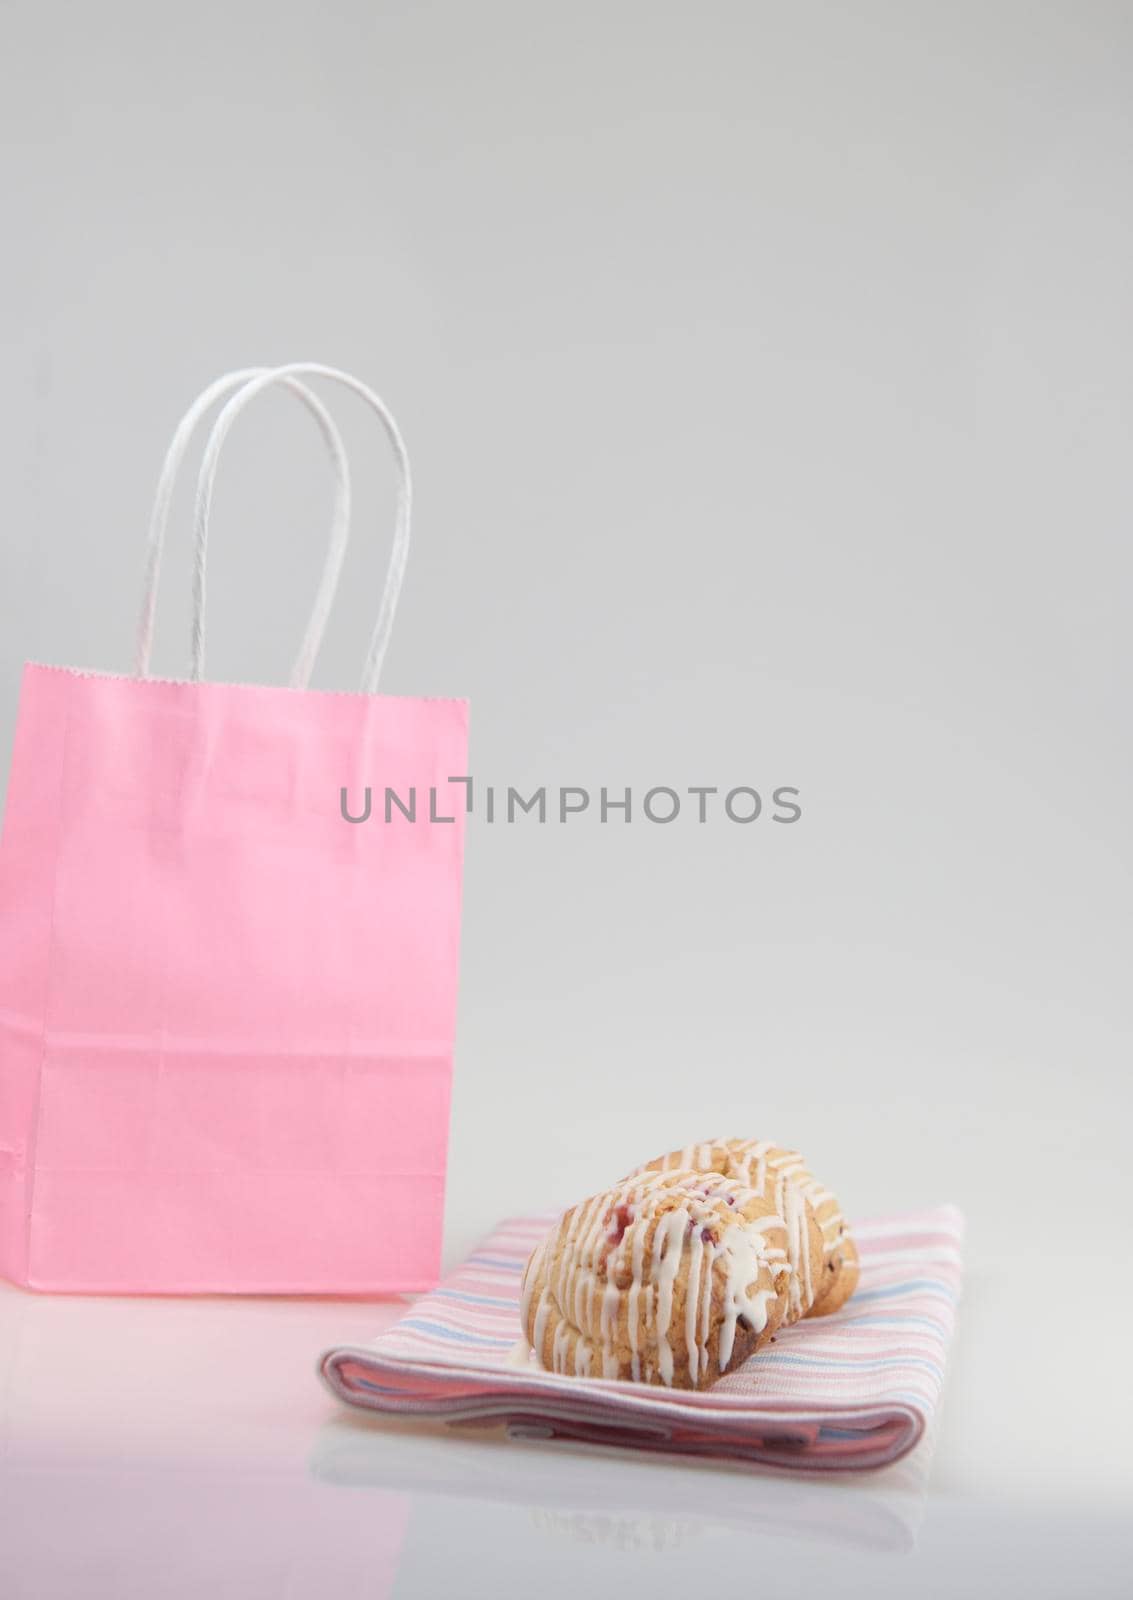 cookies glazed in pink shopping bag on a white background. The concept of copy space.